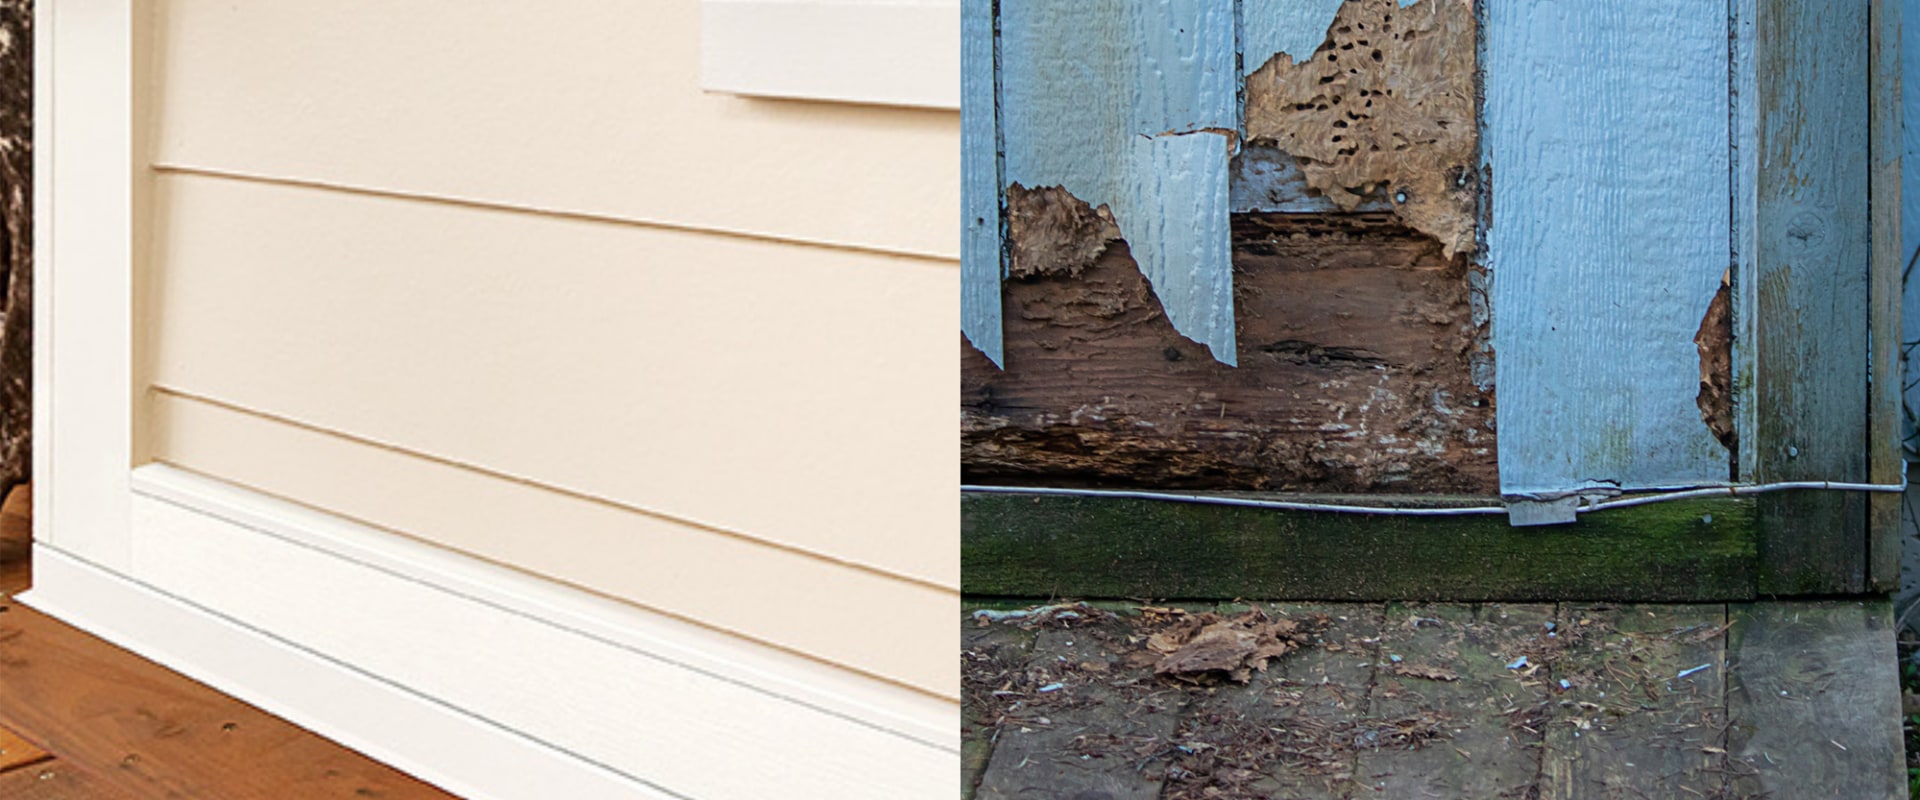 Understanding Rotting or Moldy Siding: A Guide to Materials, Installation, and Repair Services